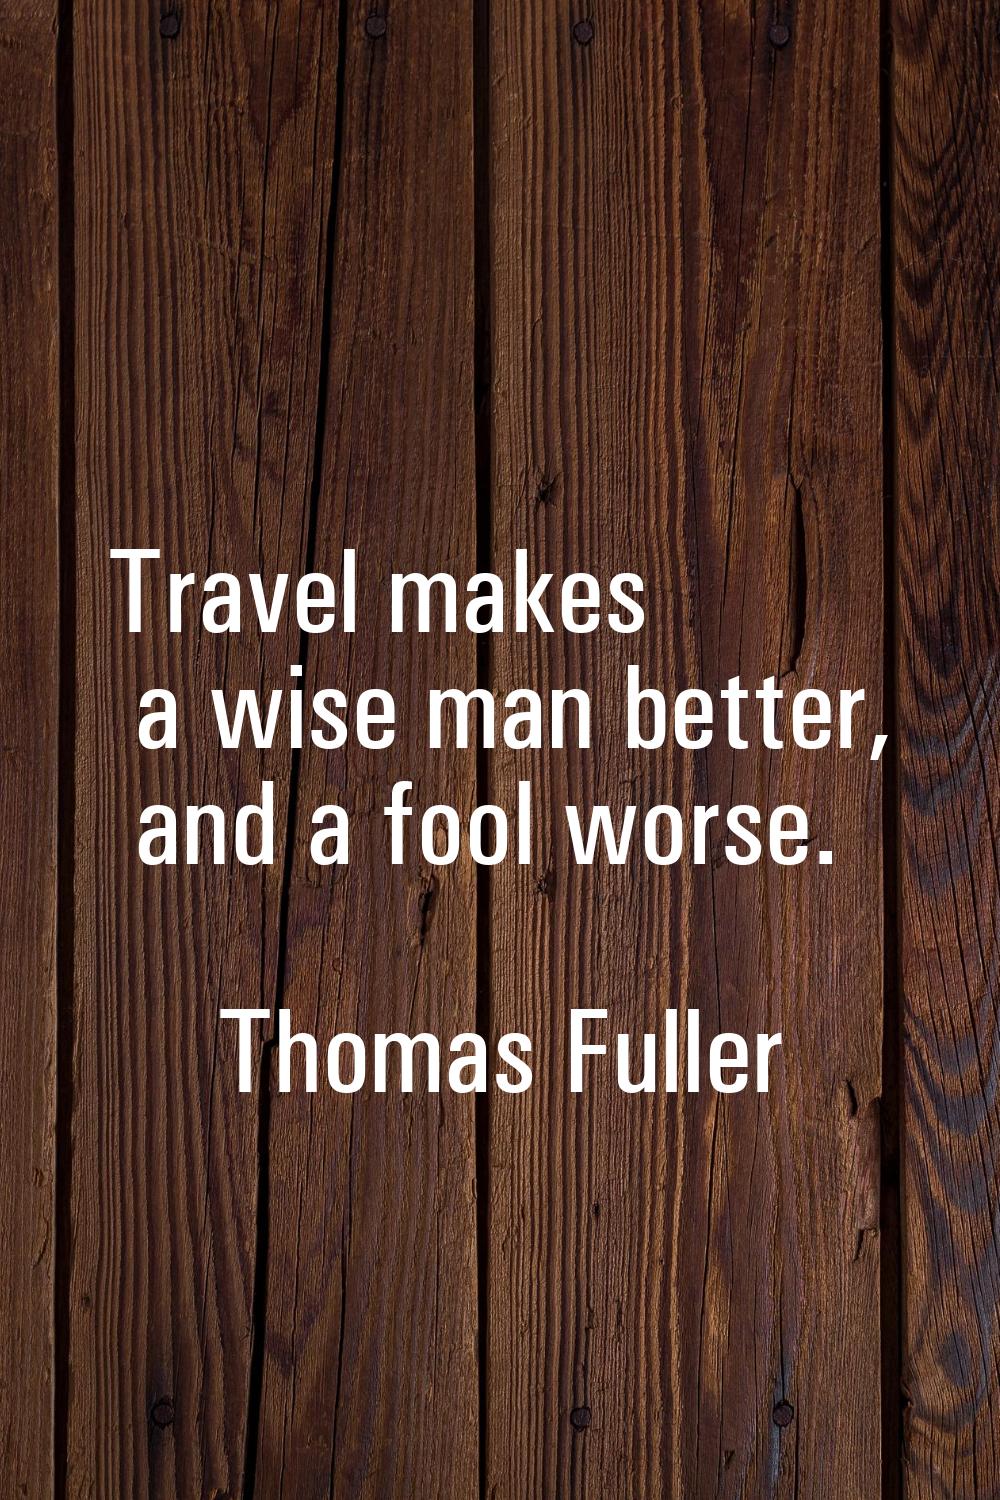 Travel makes a wise man better, and a fool worse.